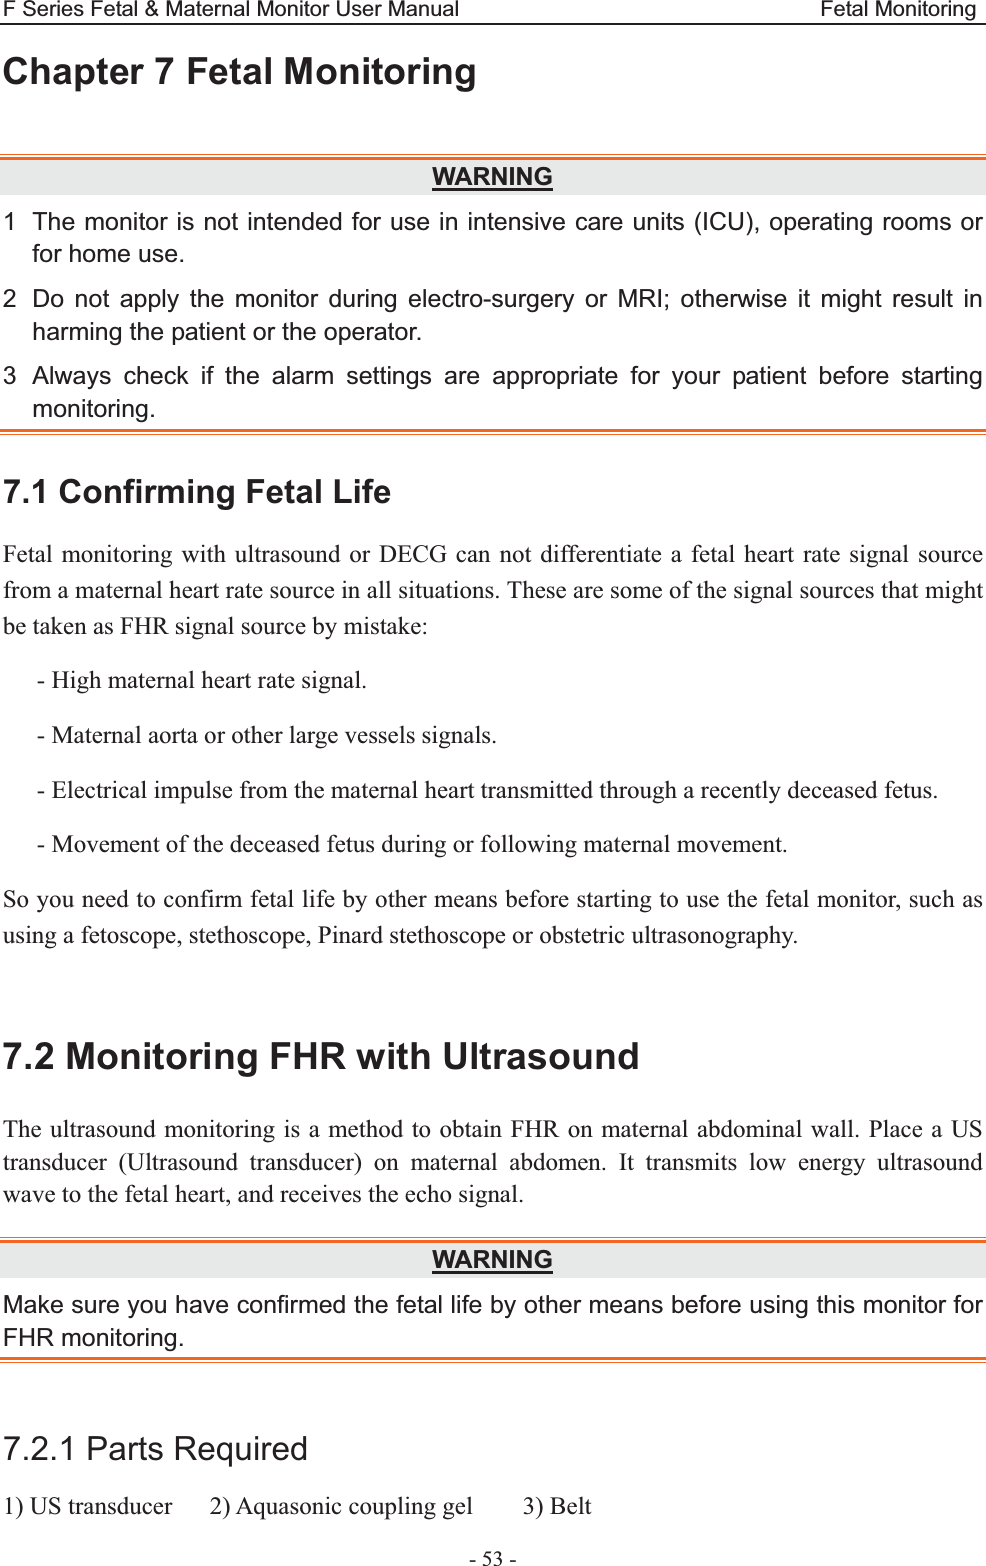 F Series Fetal &amp; Maternal Monitor User Manual                                 Fetal Monitoring - 53 - Chapter 7 Fetal Monitoring  WARNING1  The monitor is not intended for use in intensive care units (ICU), operating rooms or for home use. 2  Do not apply the monitor during electro-surgery or MRI; otherwise it might result in harming the patient or the operator. 3  Always check if the alarm settings are appropriate for your patient before starting monitoring. 7.1 Confirming Fetal Life Fetal monitoring with ultrasound or DECG can not differentiate a fetal heart rate signal source from a maternal heart rate source in all situations. These are some of the signal sources that might be taken as FHR signal source by mistake: - High maternal heart rate signal. - Maternal aorta or other large vessels signals. - Electrical impulse from the maternal heart transmitted through a recently deceased fetus. - Movement of the deceased fetus during or following maternal movement. So you need to confirm fetal life by other means before starting to use the fetal monitor, such as using a fetoscope, stethoscope, Pinard stethoscope or obstetric ultrasonography.  7.2 Monitoring FHR with Ultrasound The ultrasound monitoring is a method to obtain FHR on maternal abdominal wall. Place a US transducer (Ultrasound transducer) on maternal abdomen. It transmits low energy ultrasound wave to the fetal heart, and receives the echo signal. WARNINGMake sure you have confirmed the fetal life by other means before using this monitor for FHR monitoring.  7.2.1 Parts Required 1) US transducer      2) Aquasonic coupling gel        3) Belt 